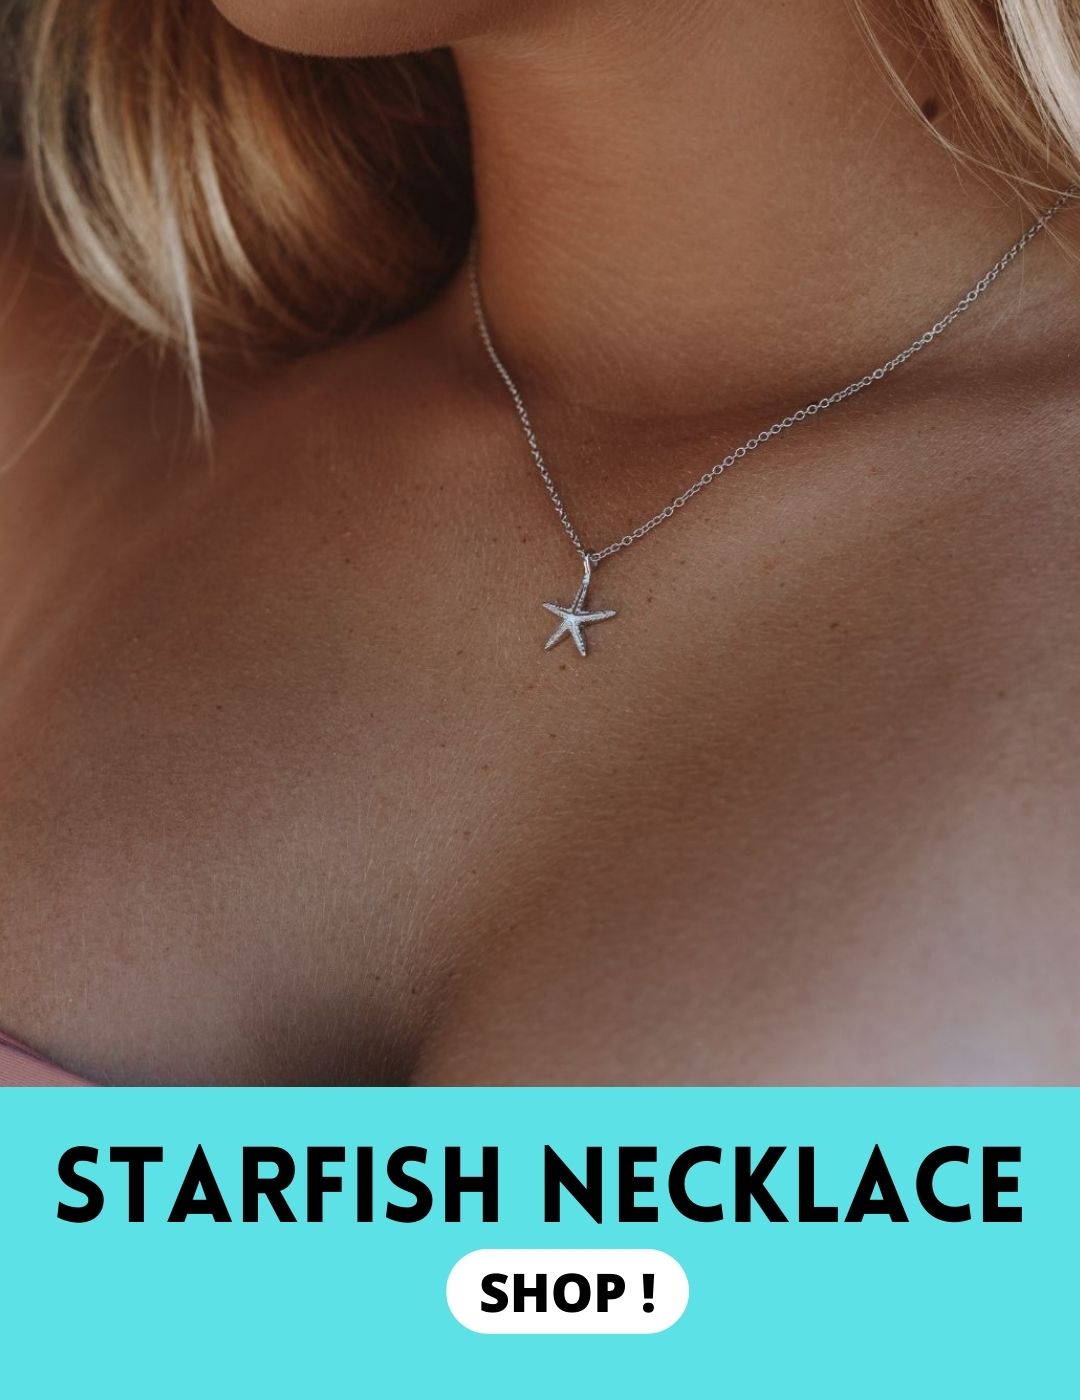 Interesting meaning and symbolism of a starfish